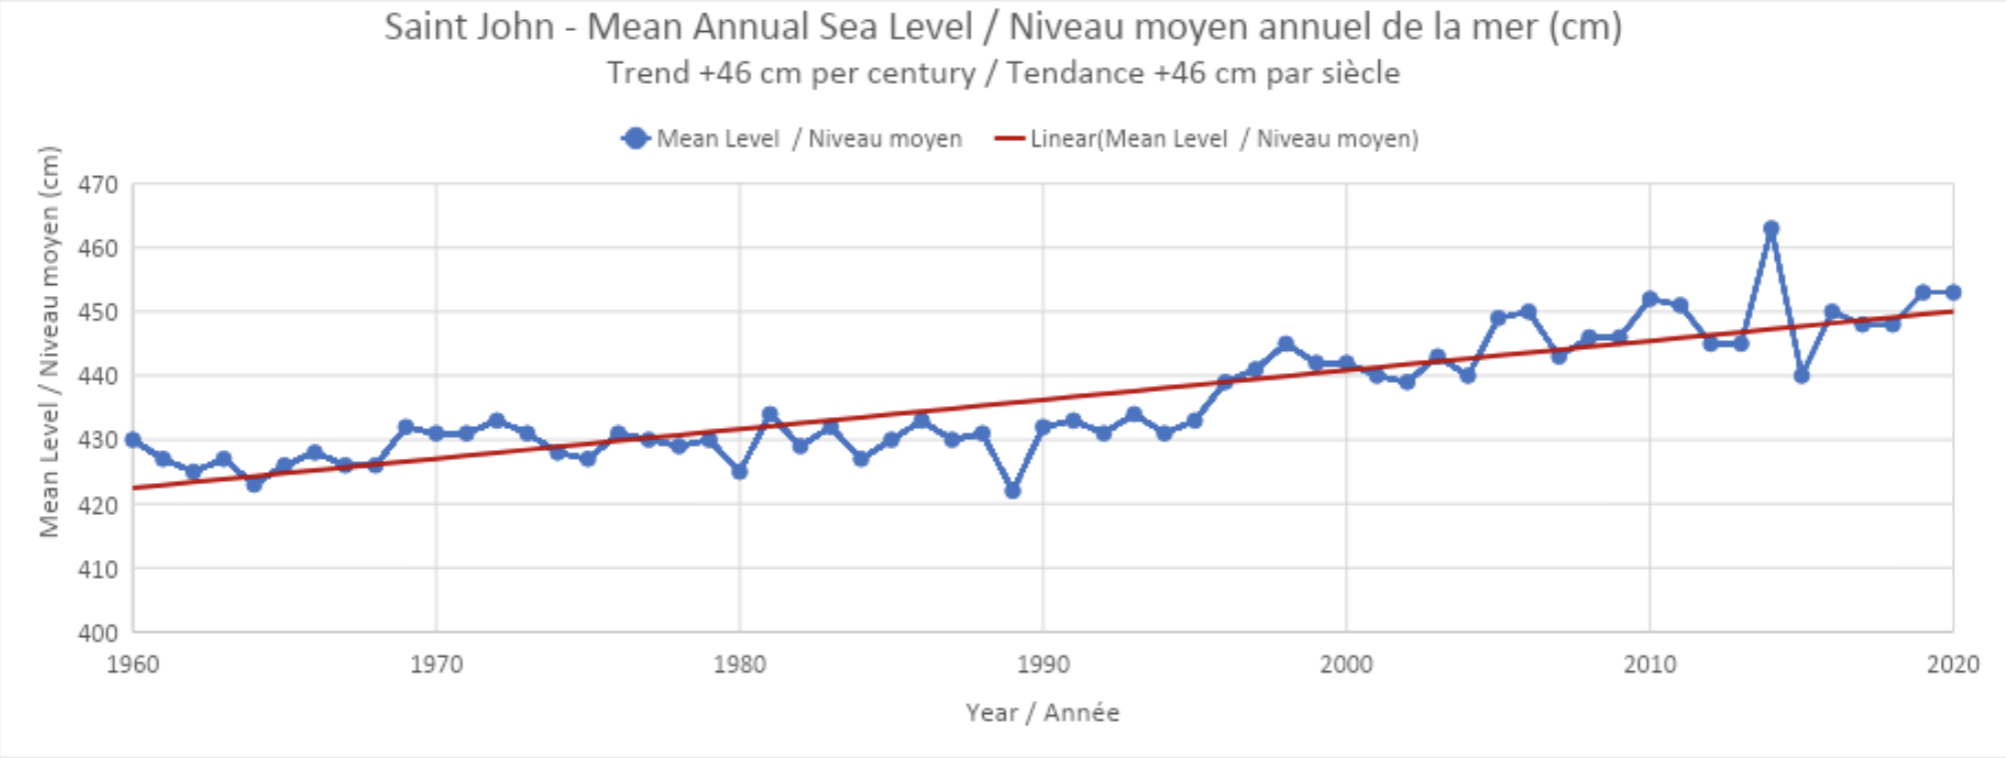 A graph titled "Saint John NB - Mean Annual Sea Level, Trend +44 cm per century". The graph shows the years 1961-2021 and has an upward trend.